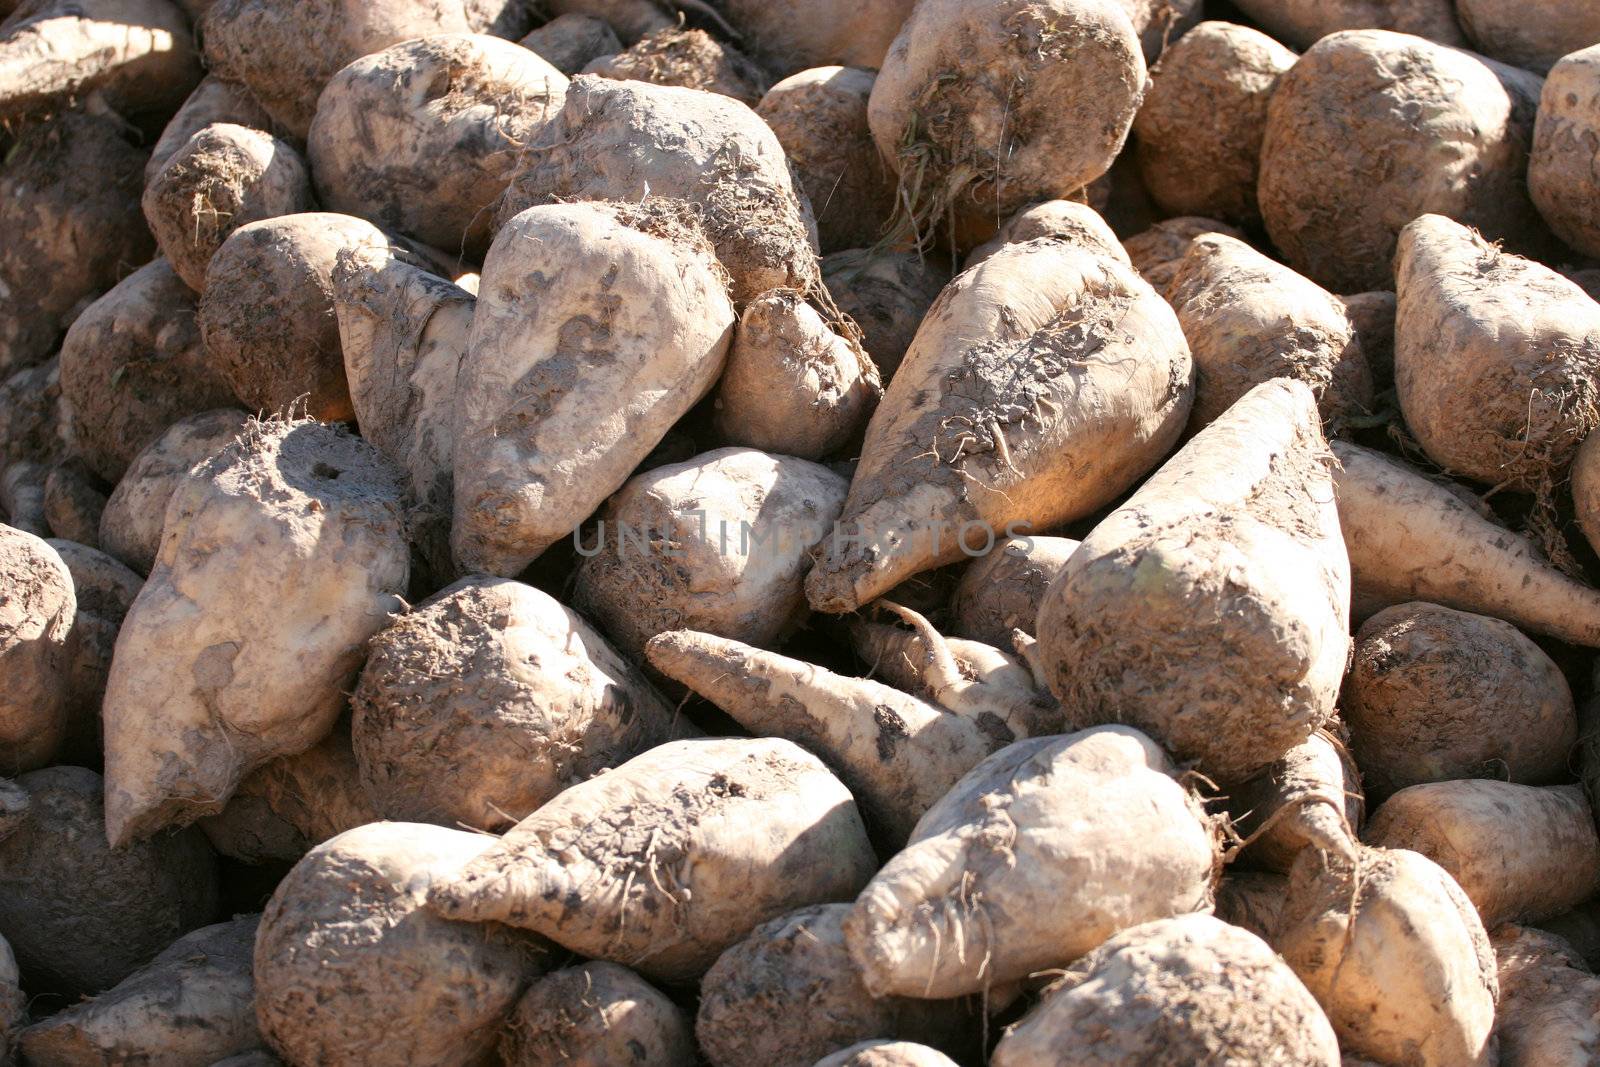 Close up of sugar beets during harvest